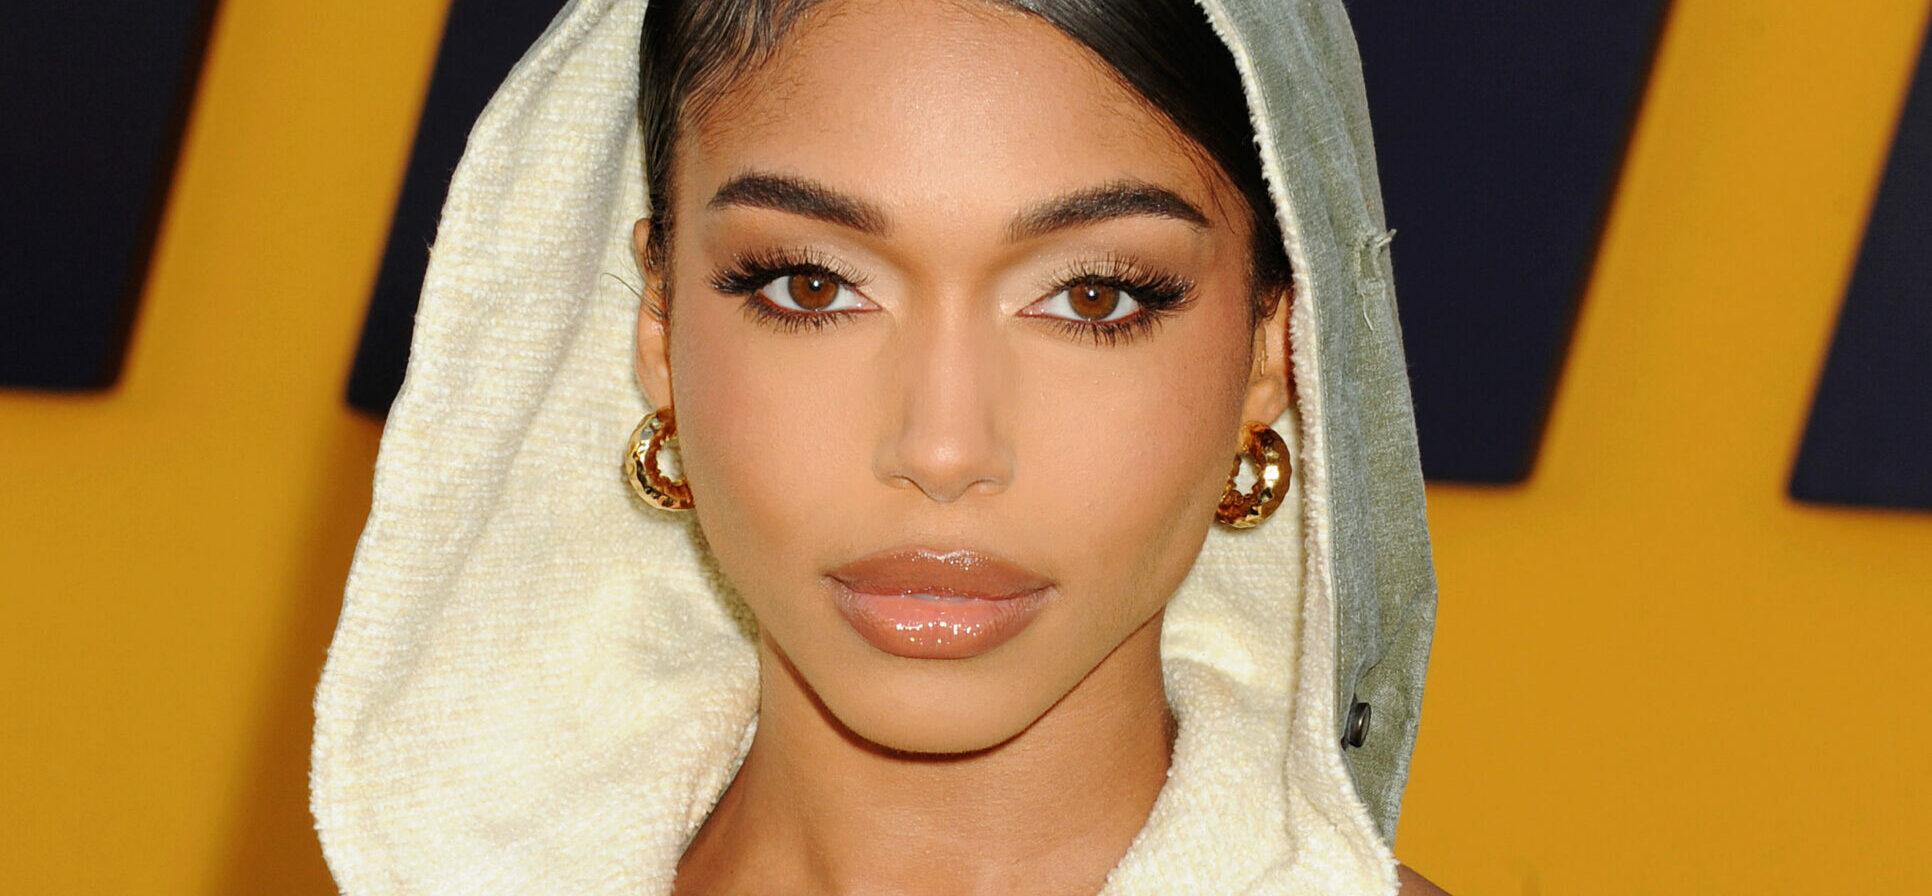 Lori Harvey Shows Off Her Ripped Abs In New Steamy Beach Photos